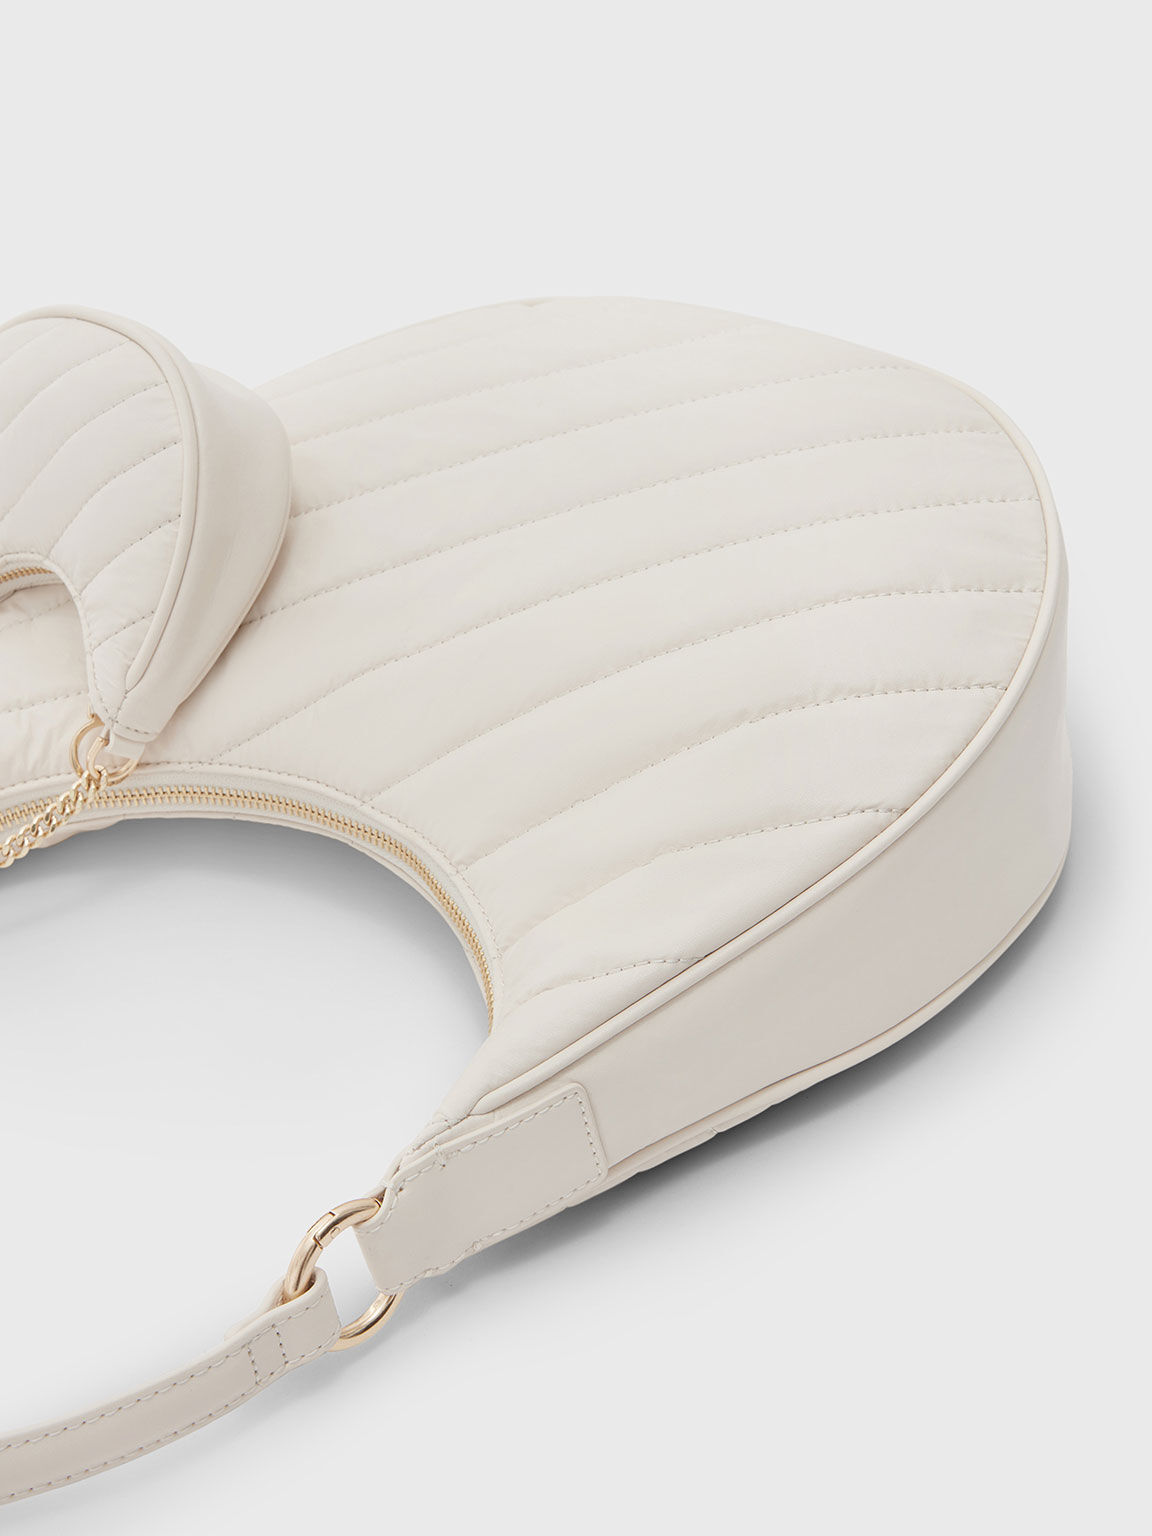 Chailly Panelled Hobo Bag, Cream, hi-res